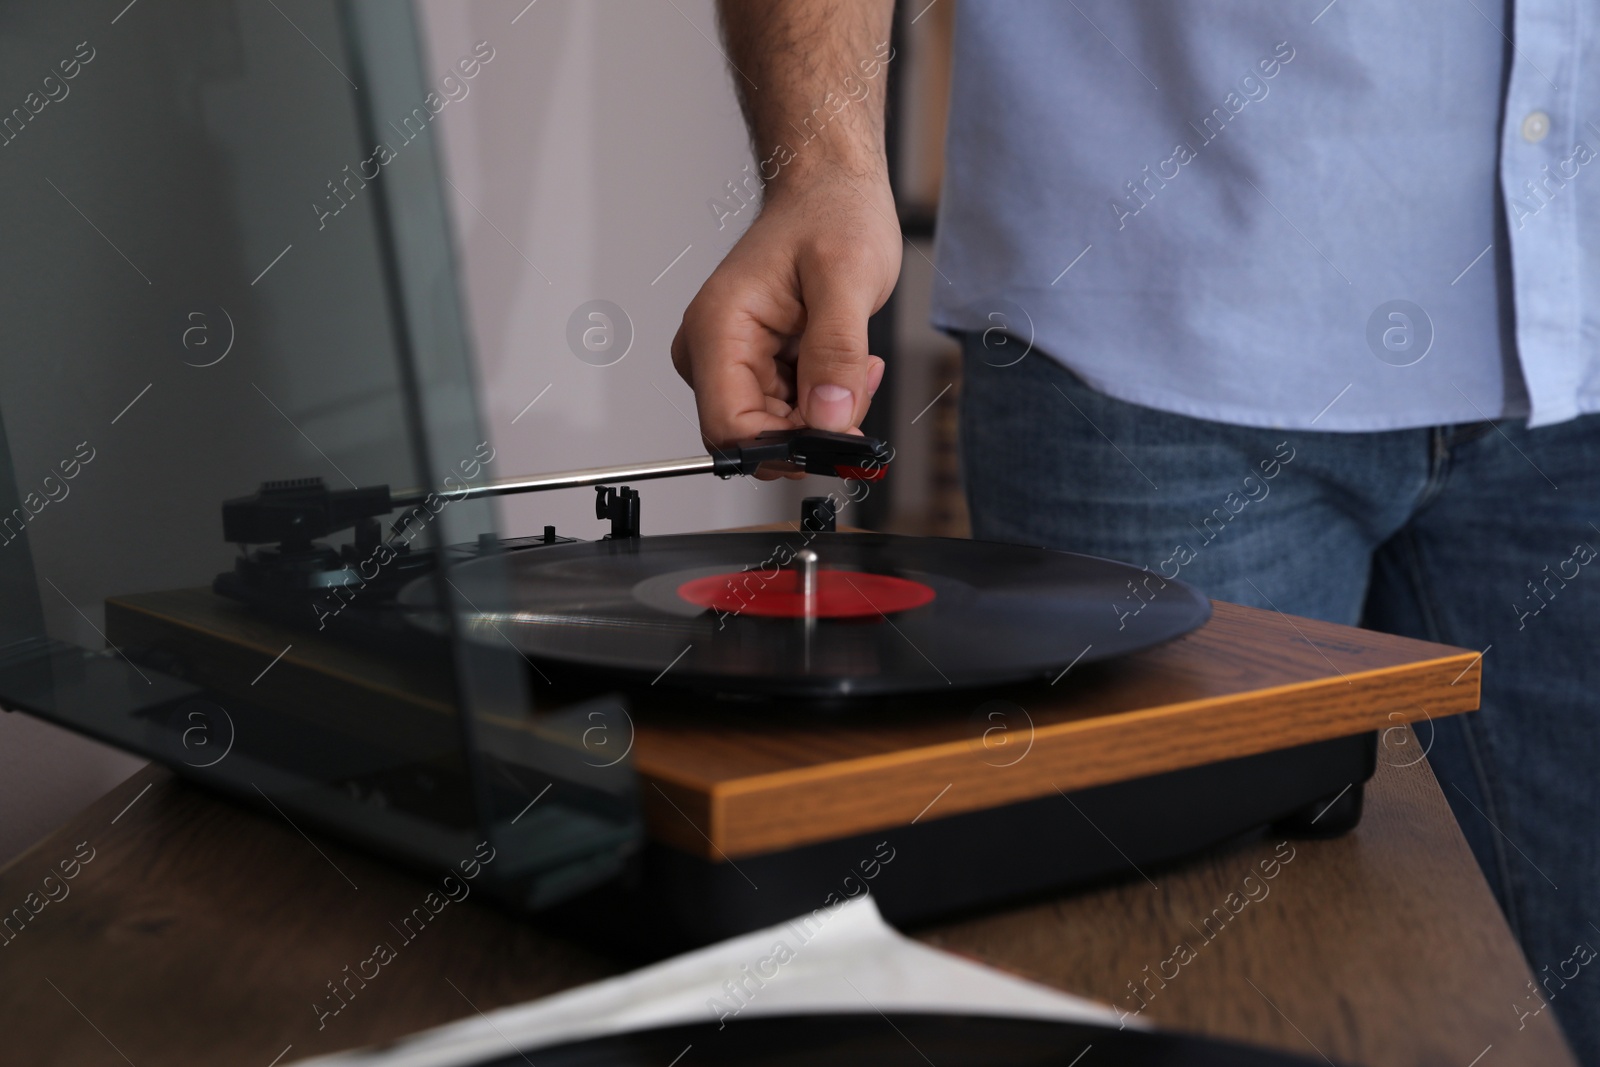 Photo of Man using turntable at home, closeup view